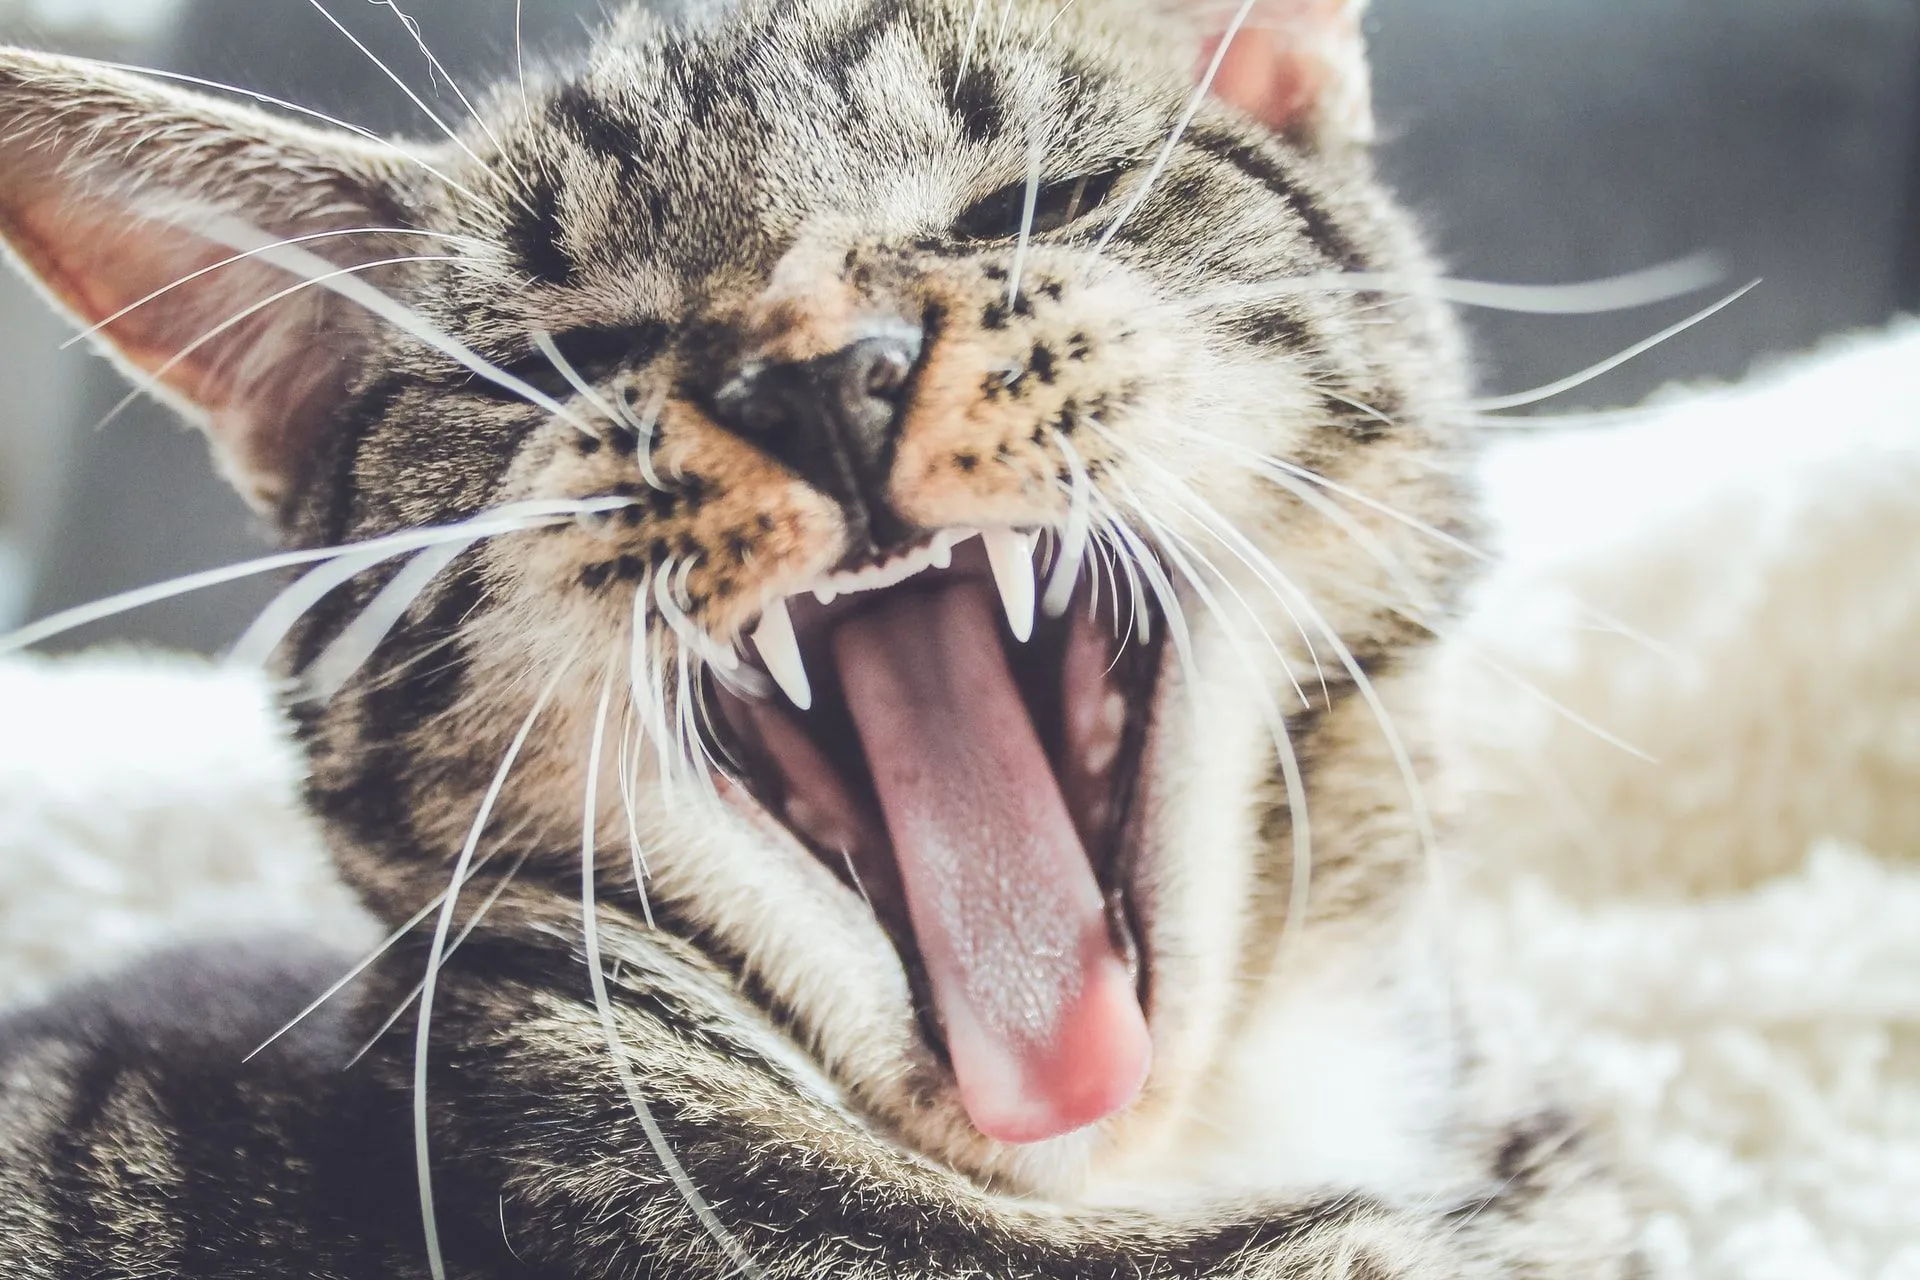 Sneezing paired with cats constantly rubbing their nose or face may indicate infections.